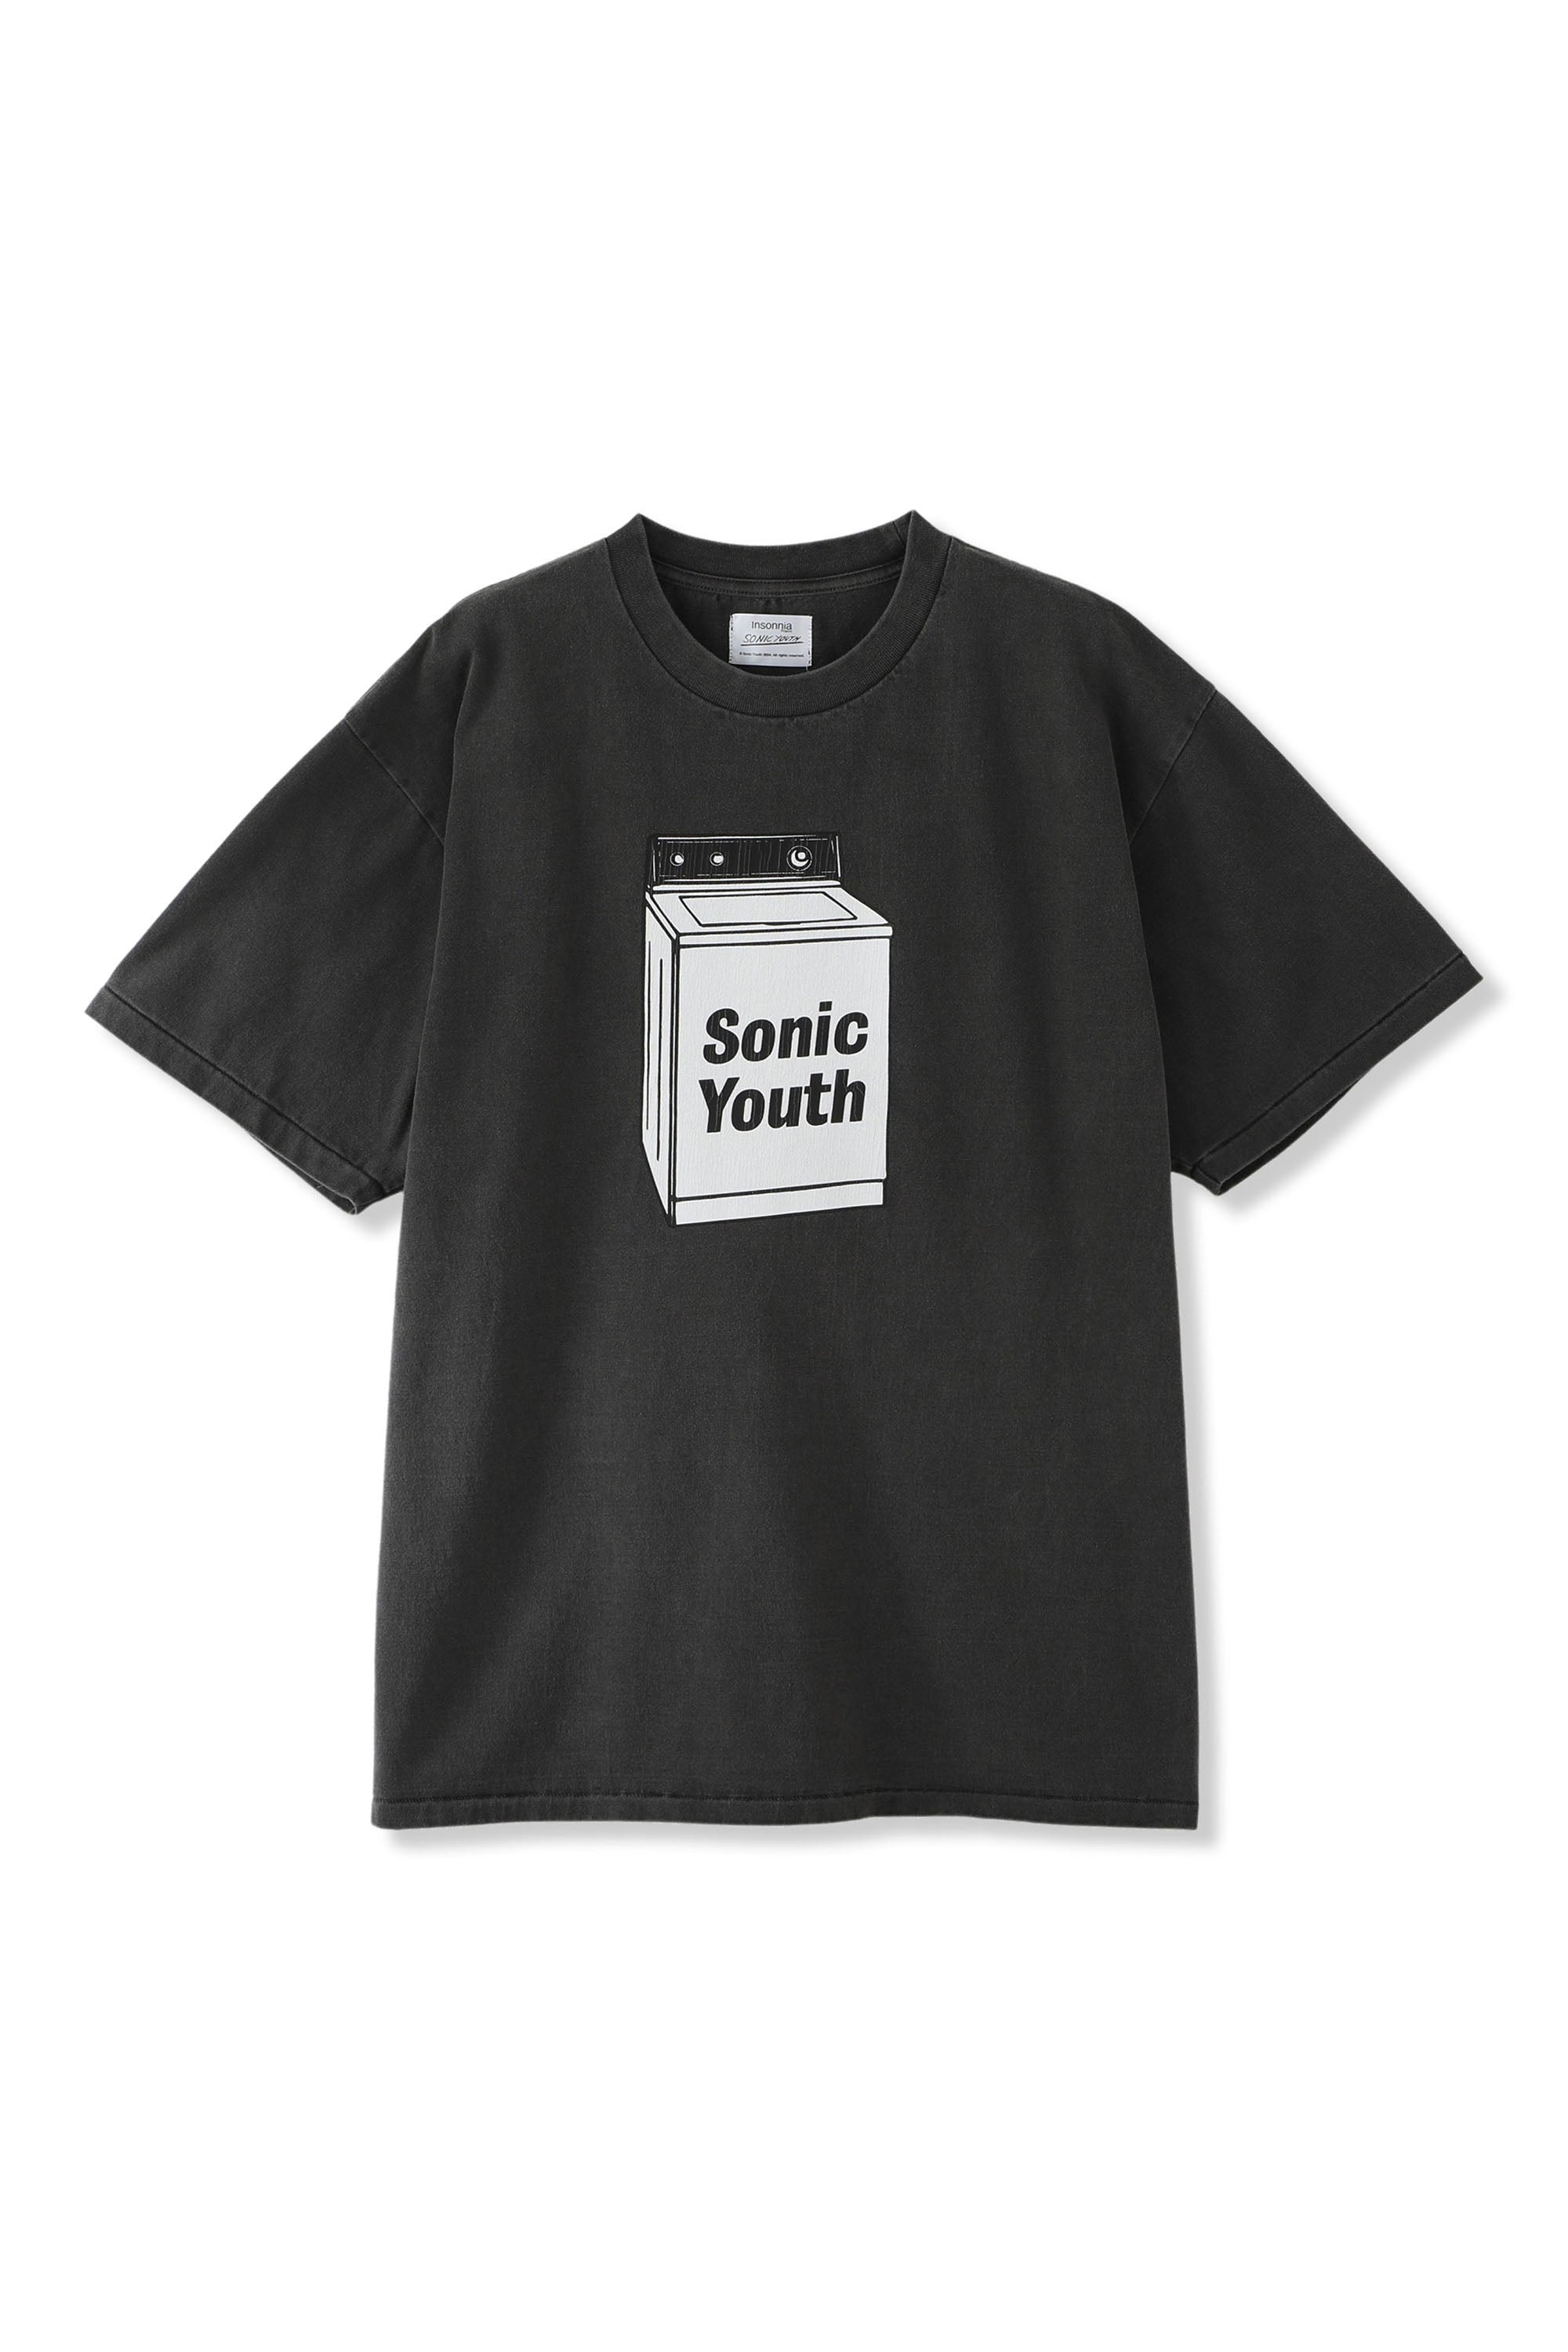 SONIC YOUTH WASHING MACHINE TEE BLACK – Insonnia Projects